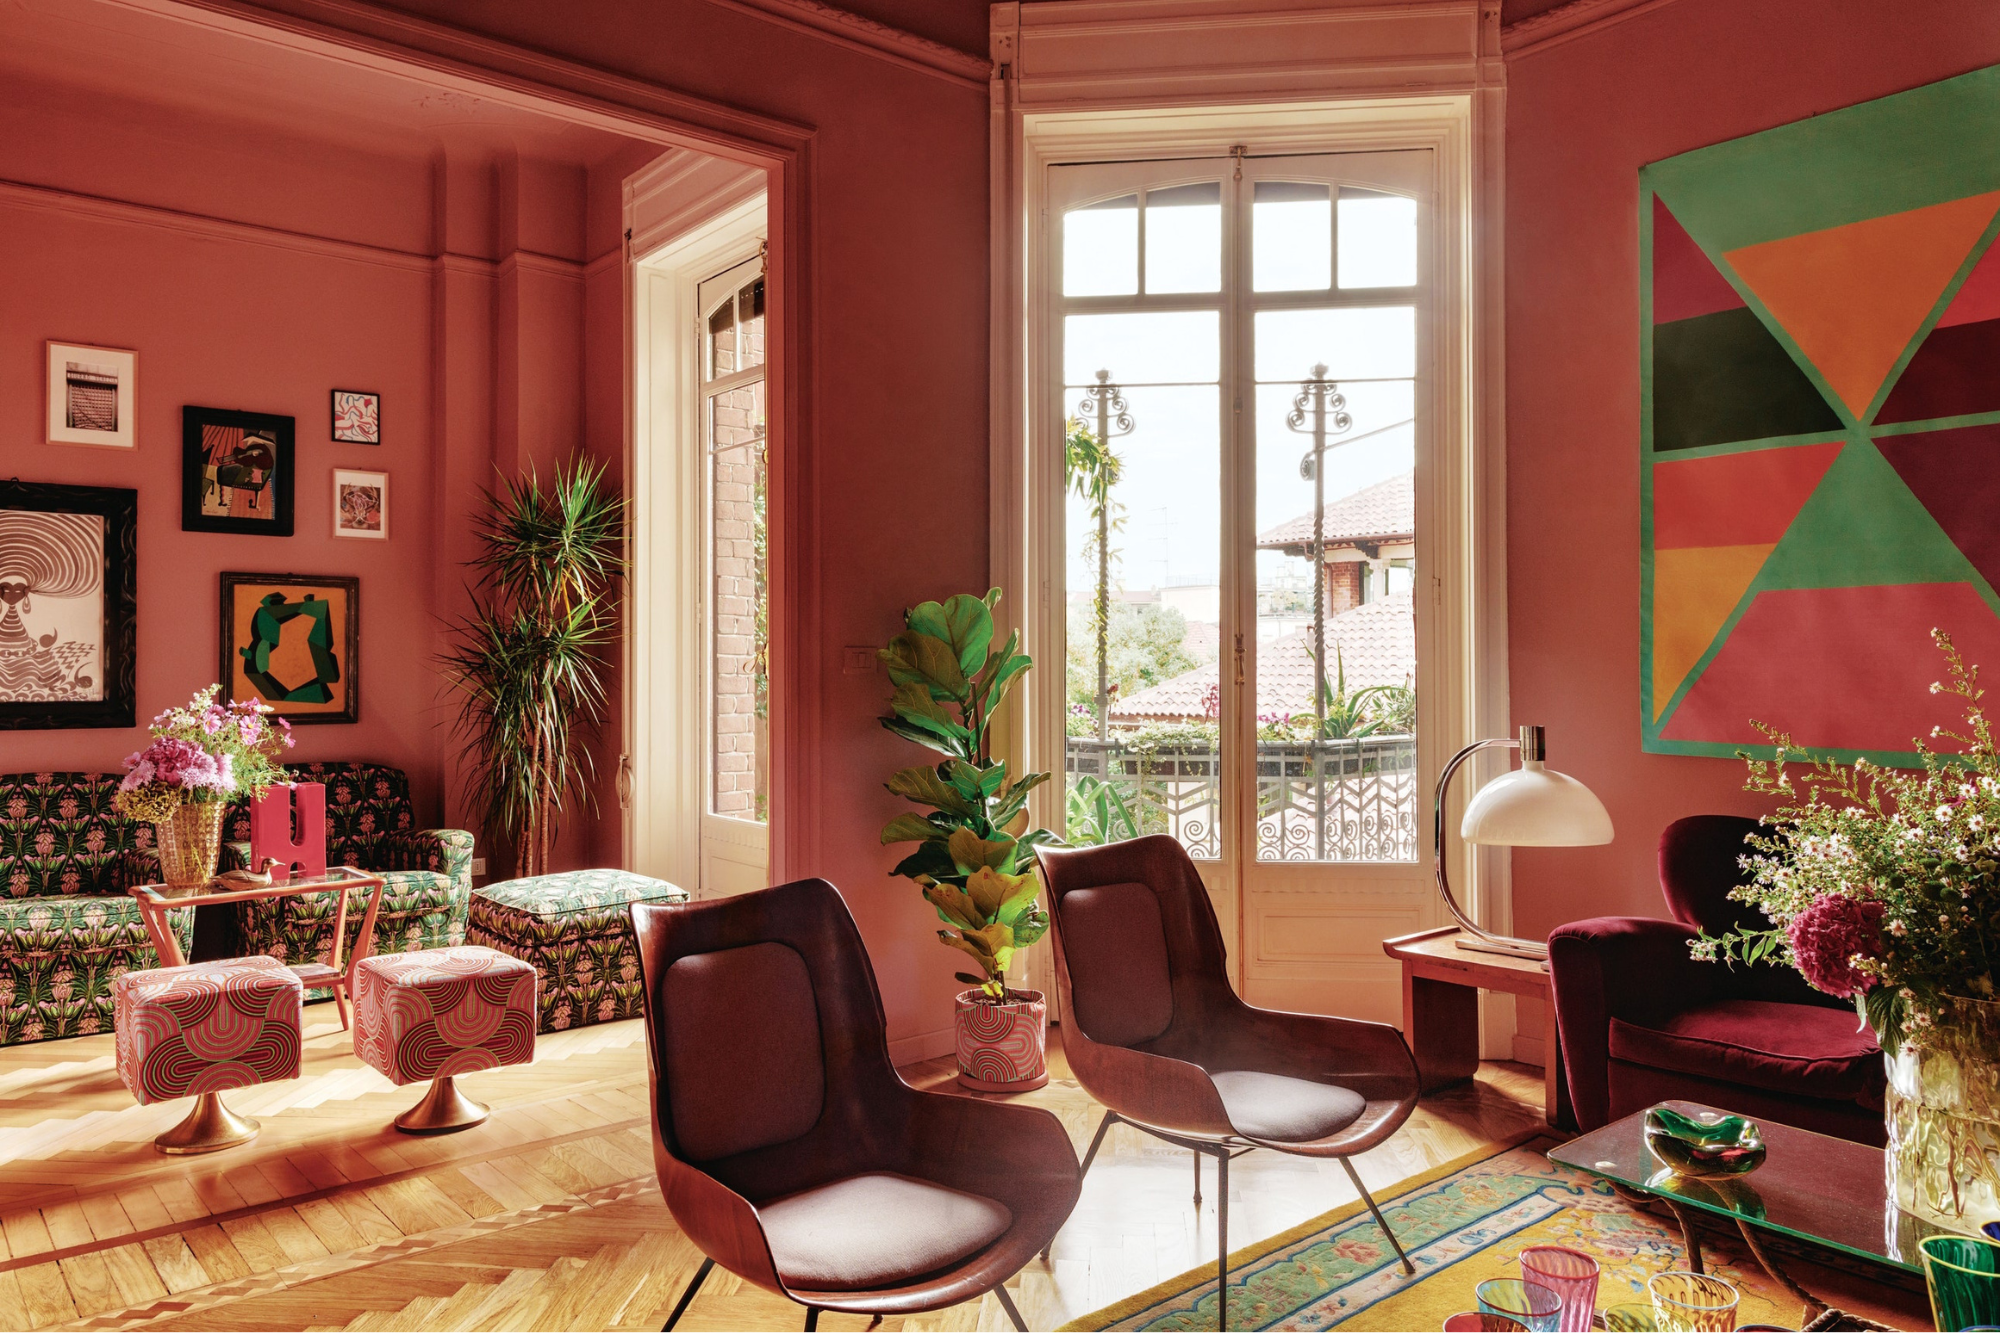 Apartment of the designer J.J. Martin in Milan by Matthieu Salvaing for AD Magazine